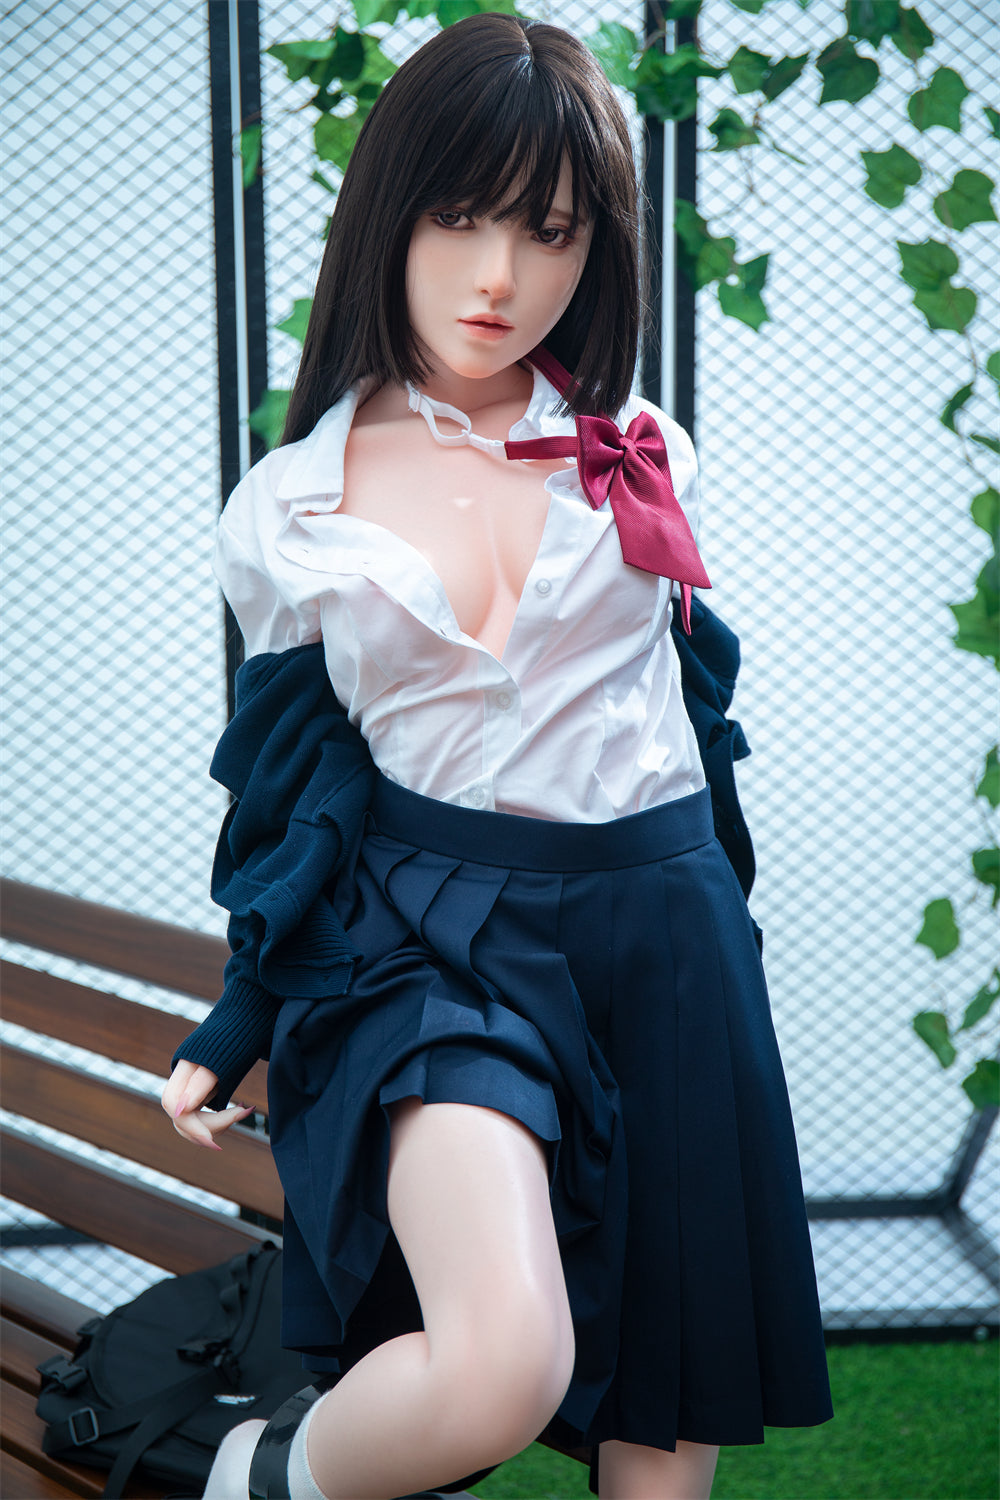 Irontech Doll 148 cm Silicone - Lingnai | Buy Sex Dolls at DOLLS ACTUALLY